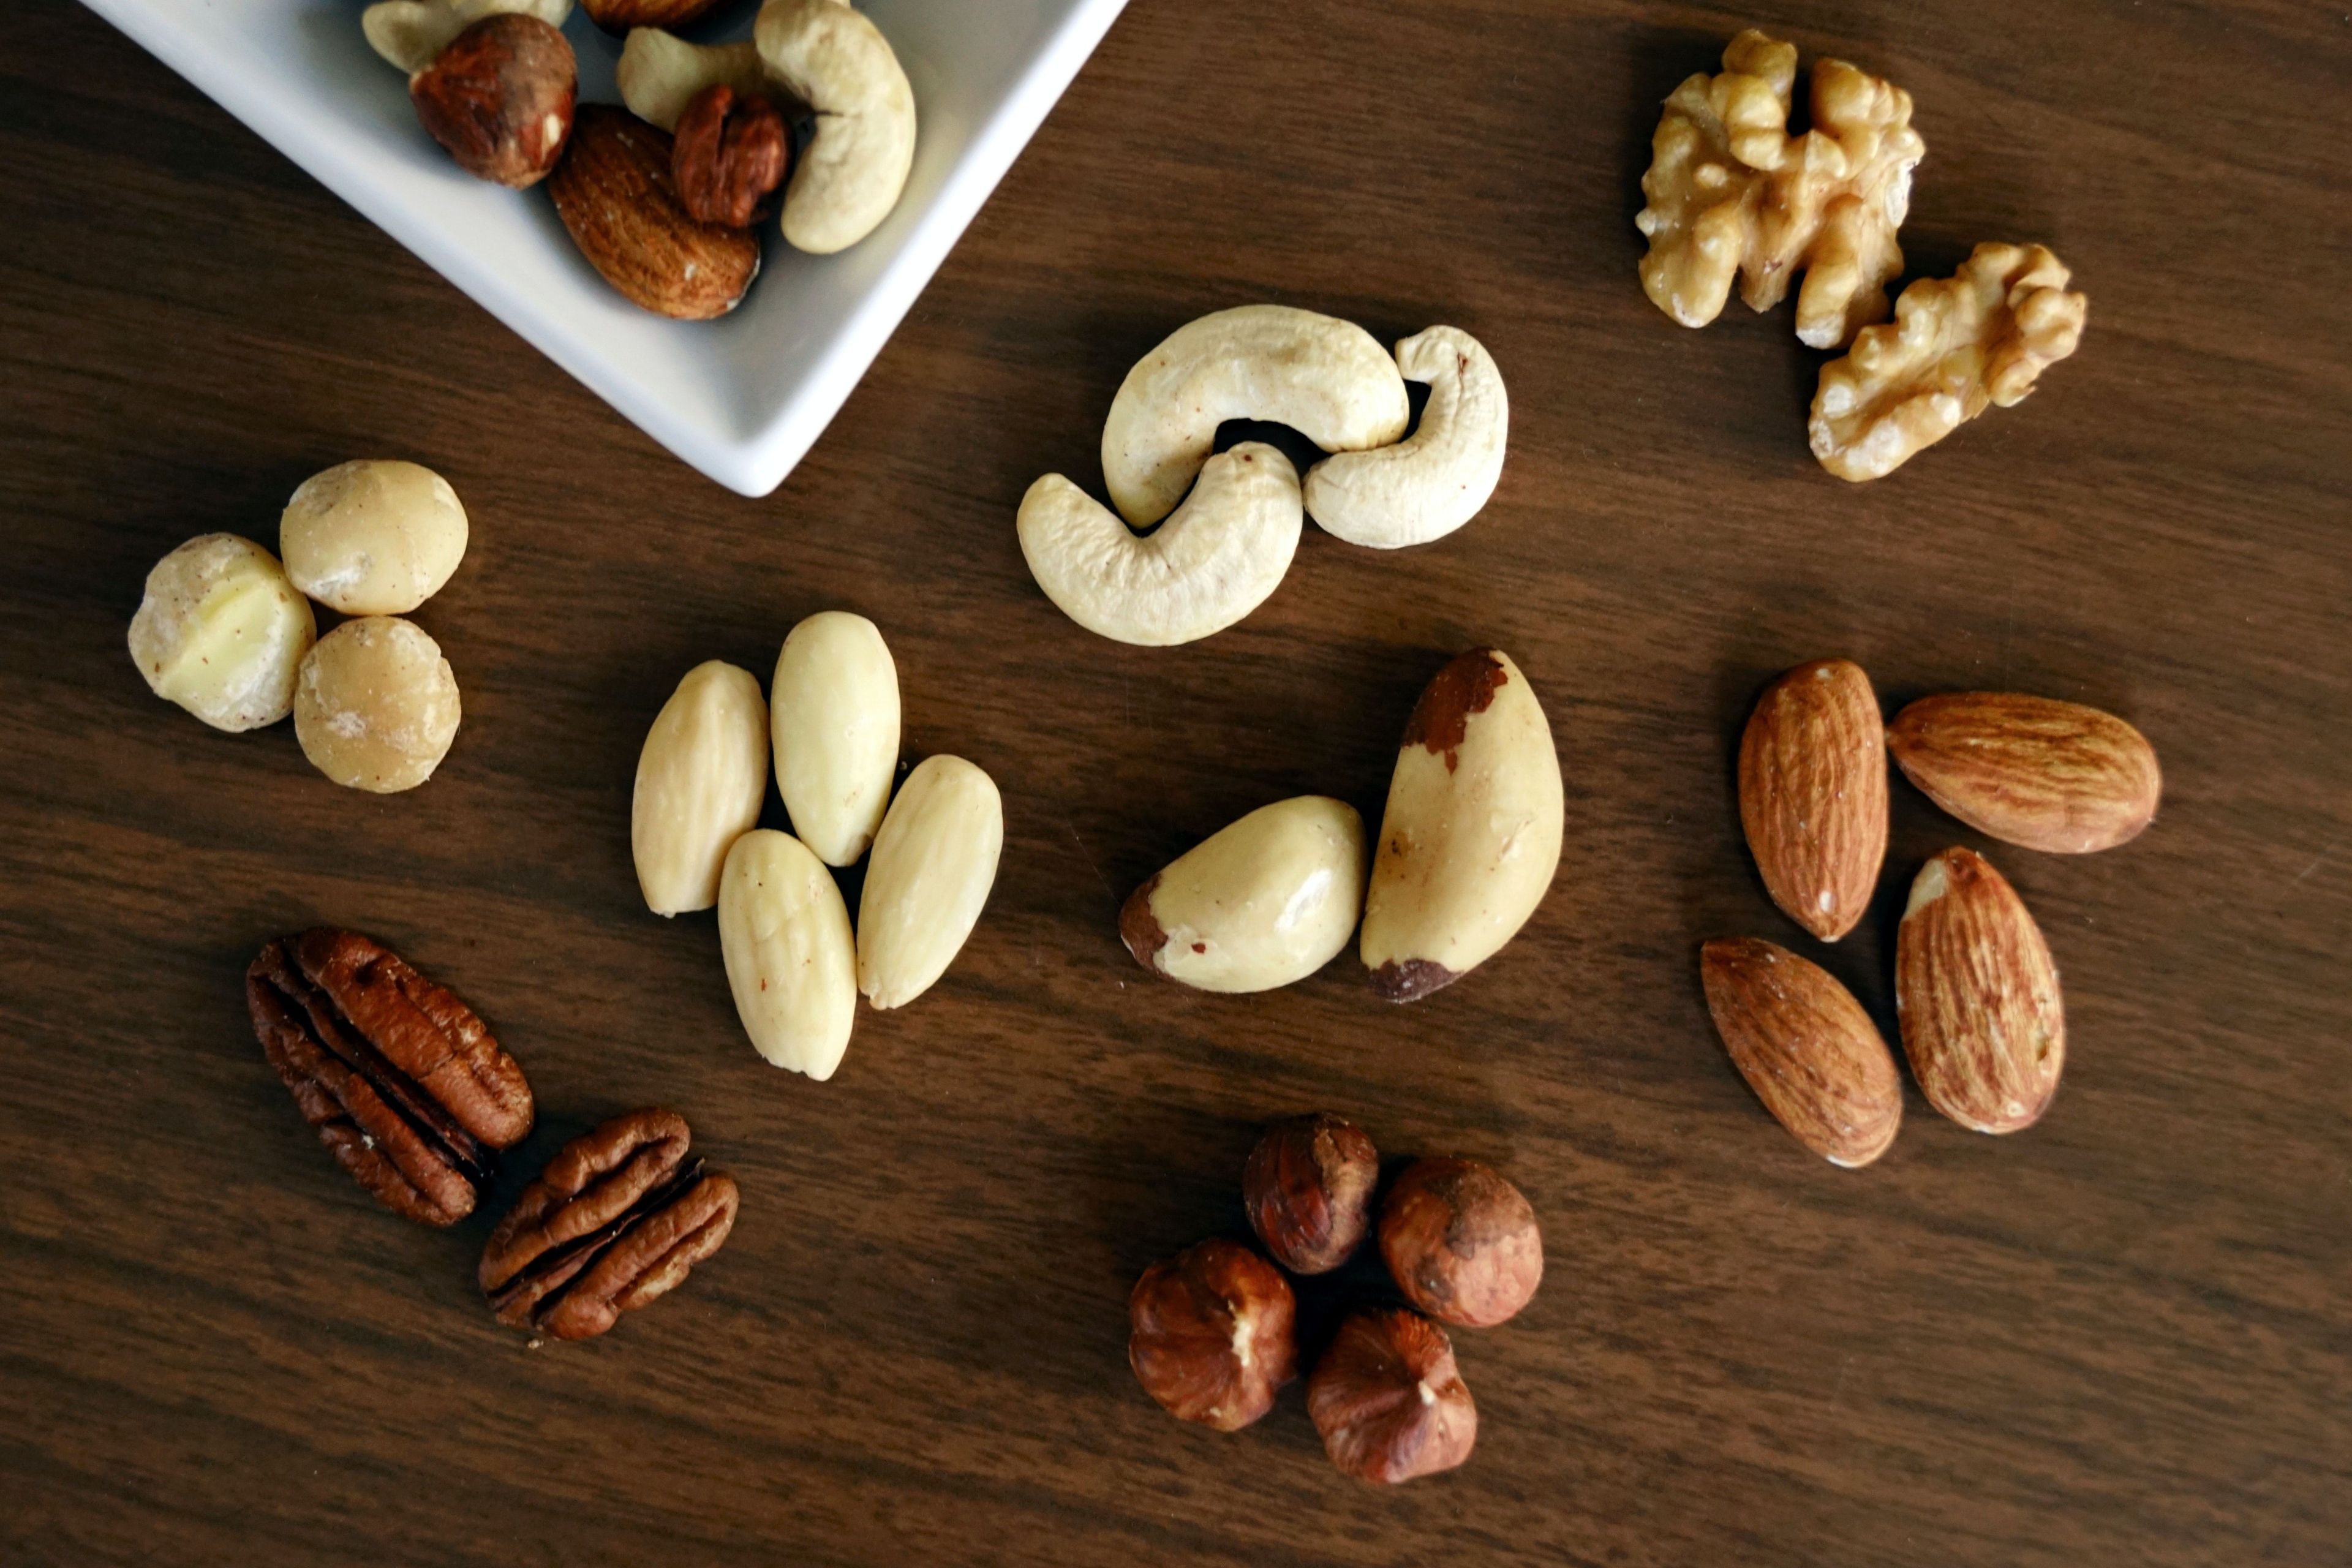 A variety on selenium-containing nuts on a table